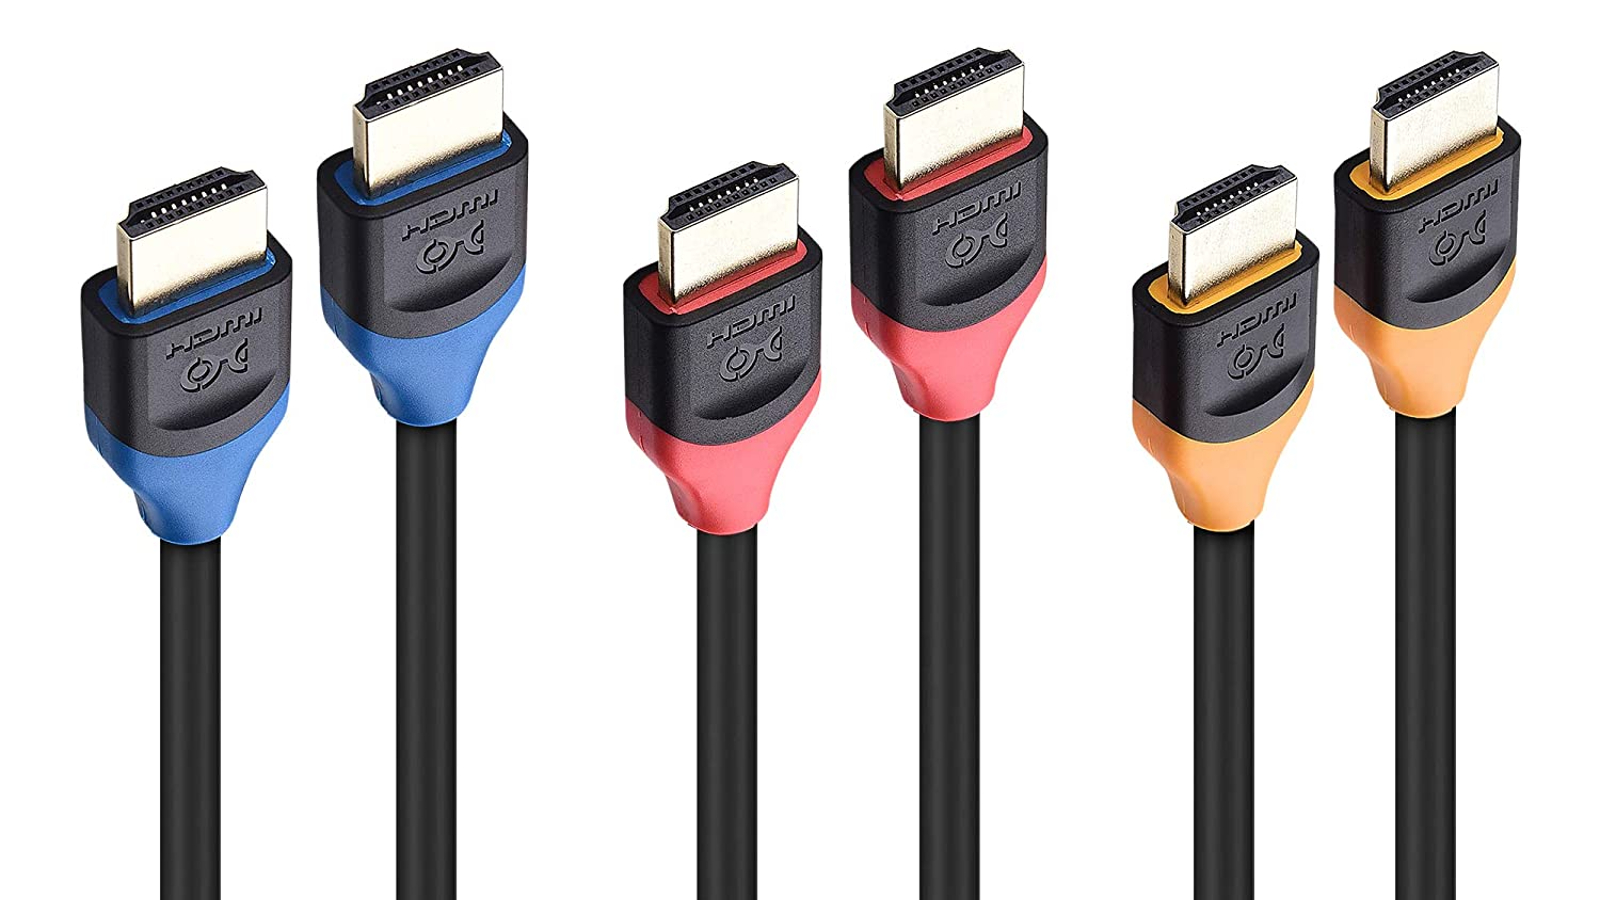 Cable Matters 3-pack of HDMI Cables - Best multipack